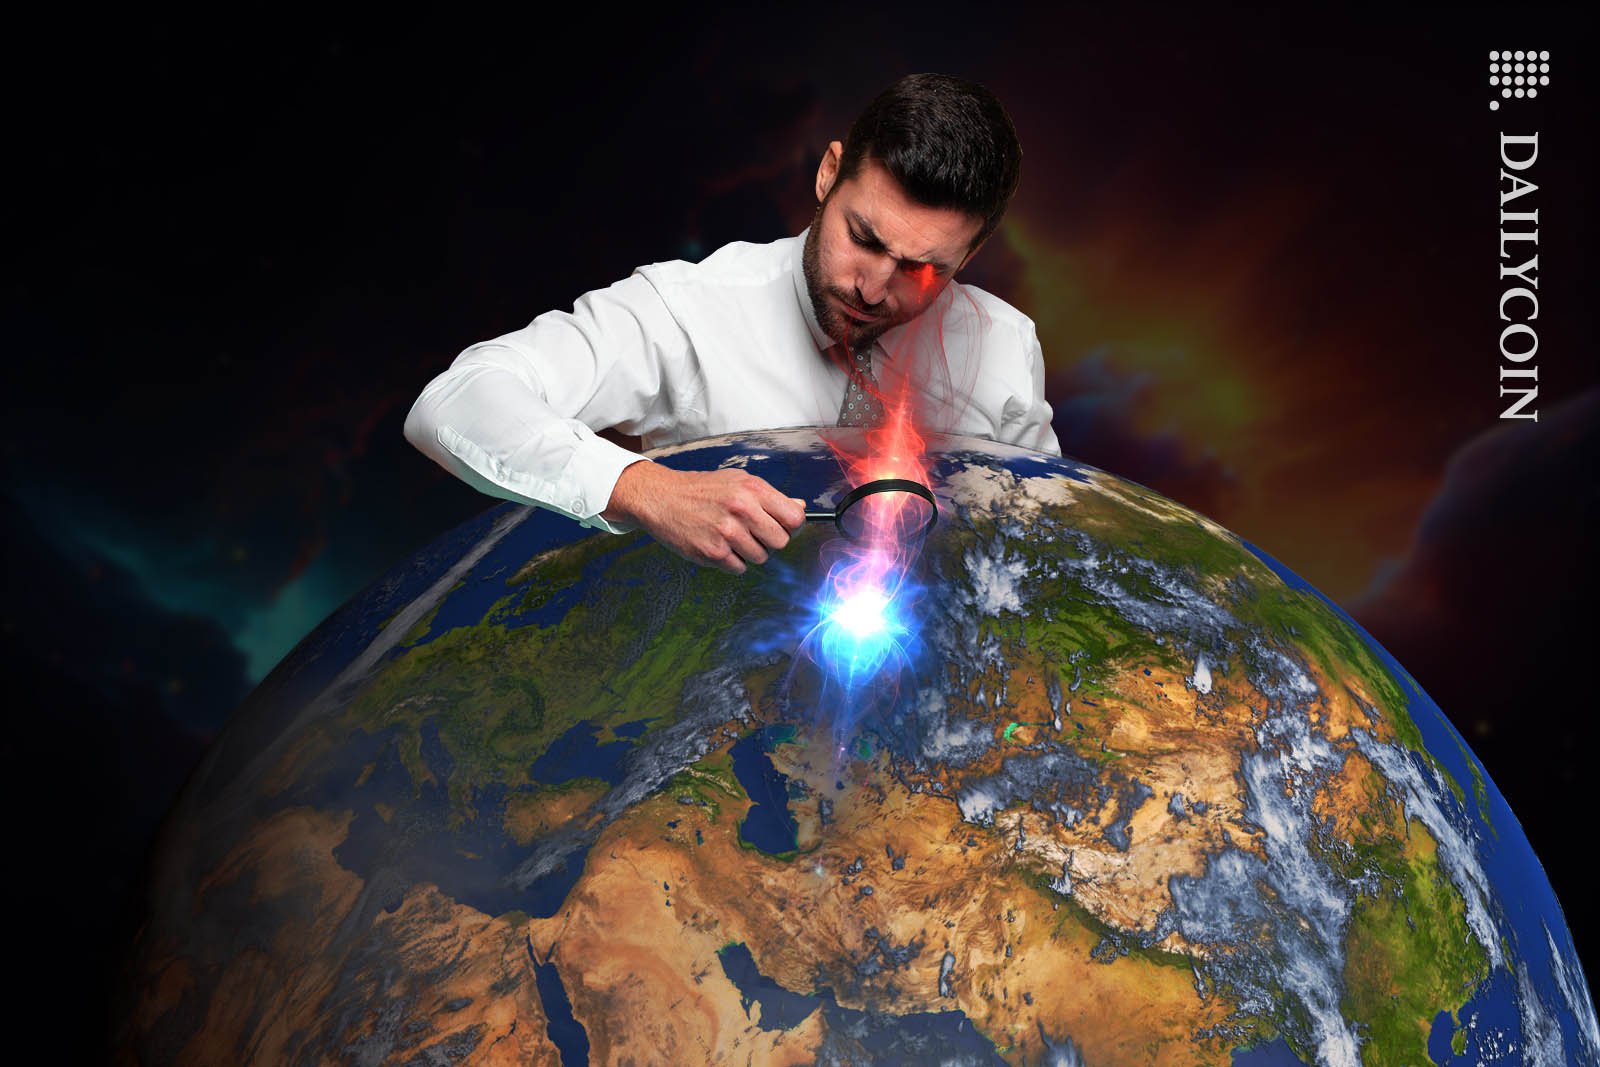 Man in white shirt searcing for something on planet Earth with a magnifying glass.